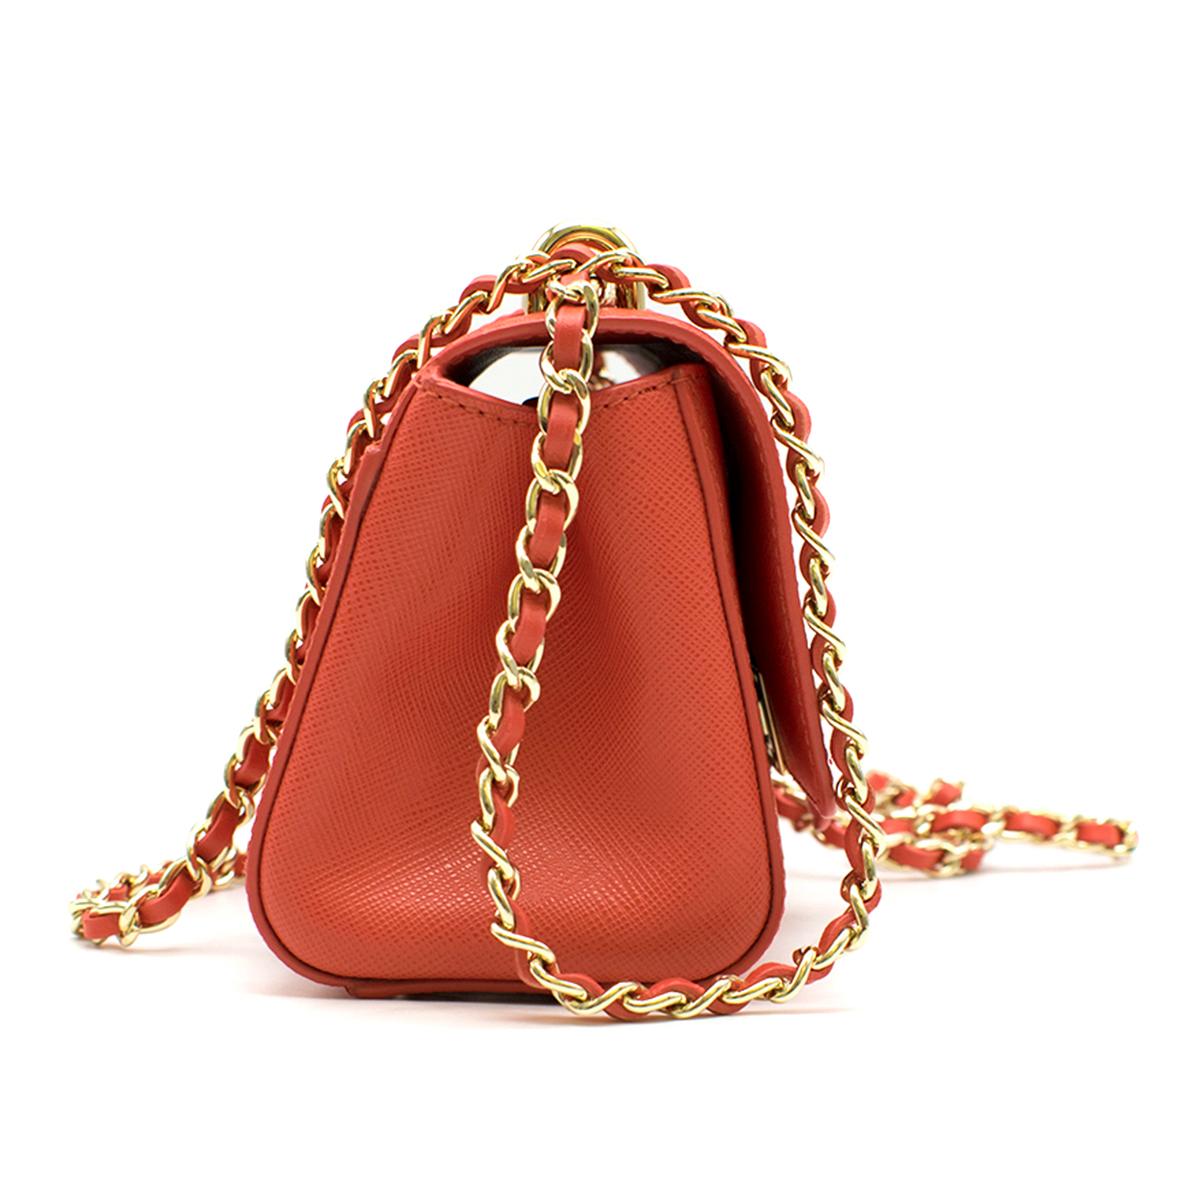 Aspinal of London Micro Lottie Bag 

- Coral leather micro bag
- Signature letterbox lock closure
- Leather plaited metal chain for shoulder and cross-body styling
- Grosgrain lined interior
- Interior patch pocket
- Protective base feet
- Signature